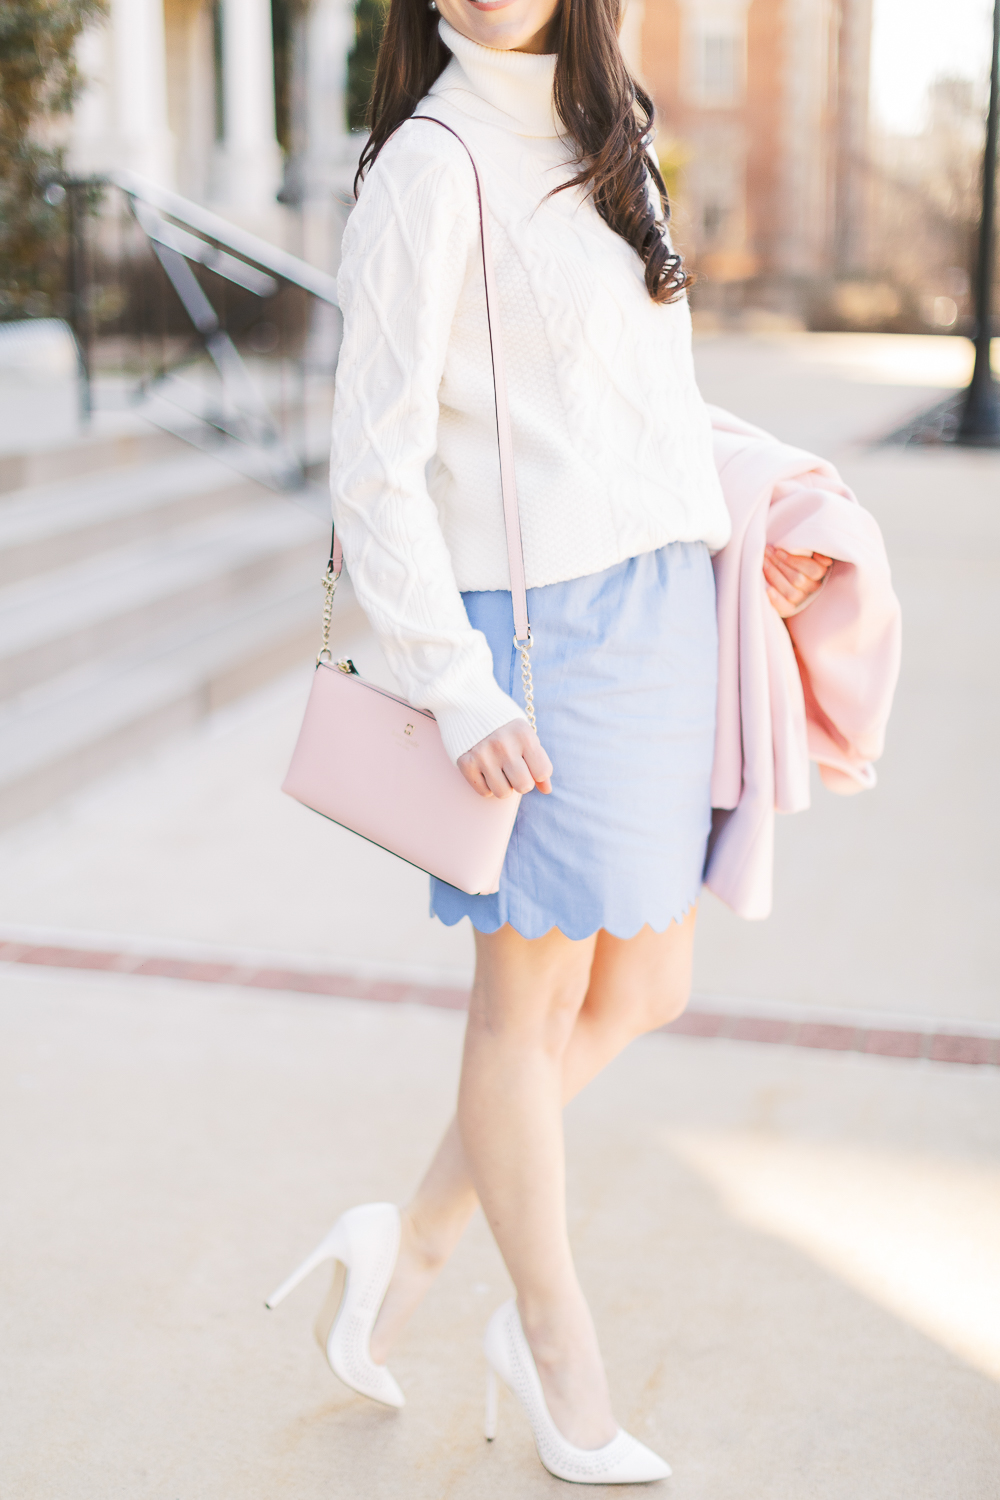 Preppy Spring Outfits: My Top J.Crew Factory Spring Style Picks by Stephanie Ziajka from the popular affordable fashion blog Diary of a Debutante, J.Crew Factory Scalloped Sidewalk Skirt, J.Crew Factory Scalloped Cami Tops, cute spring outfits for women, cute spring outfits